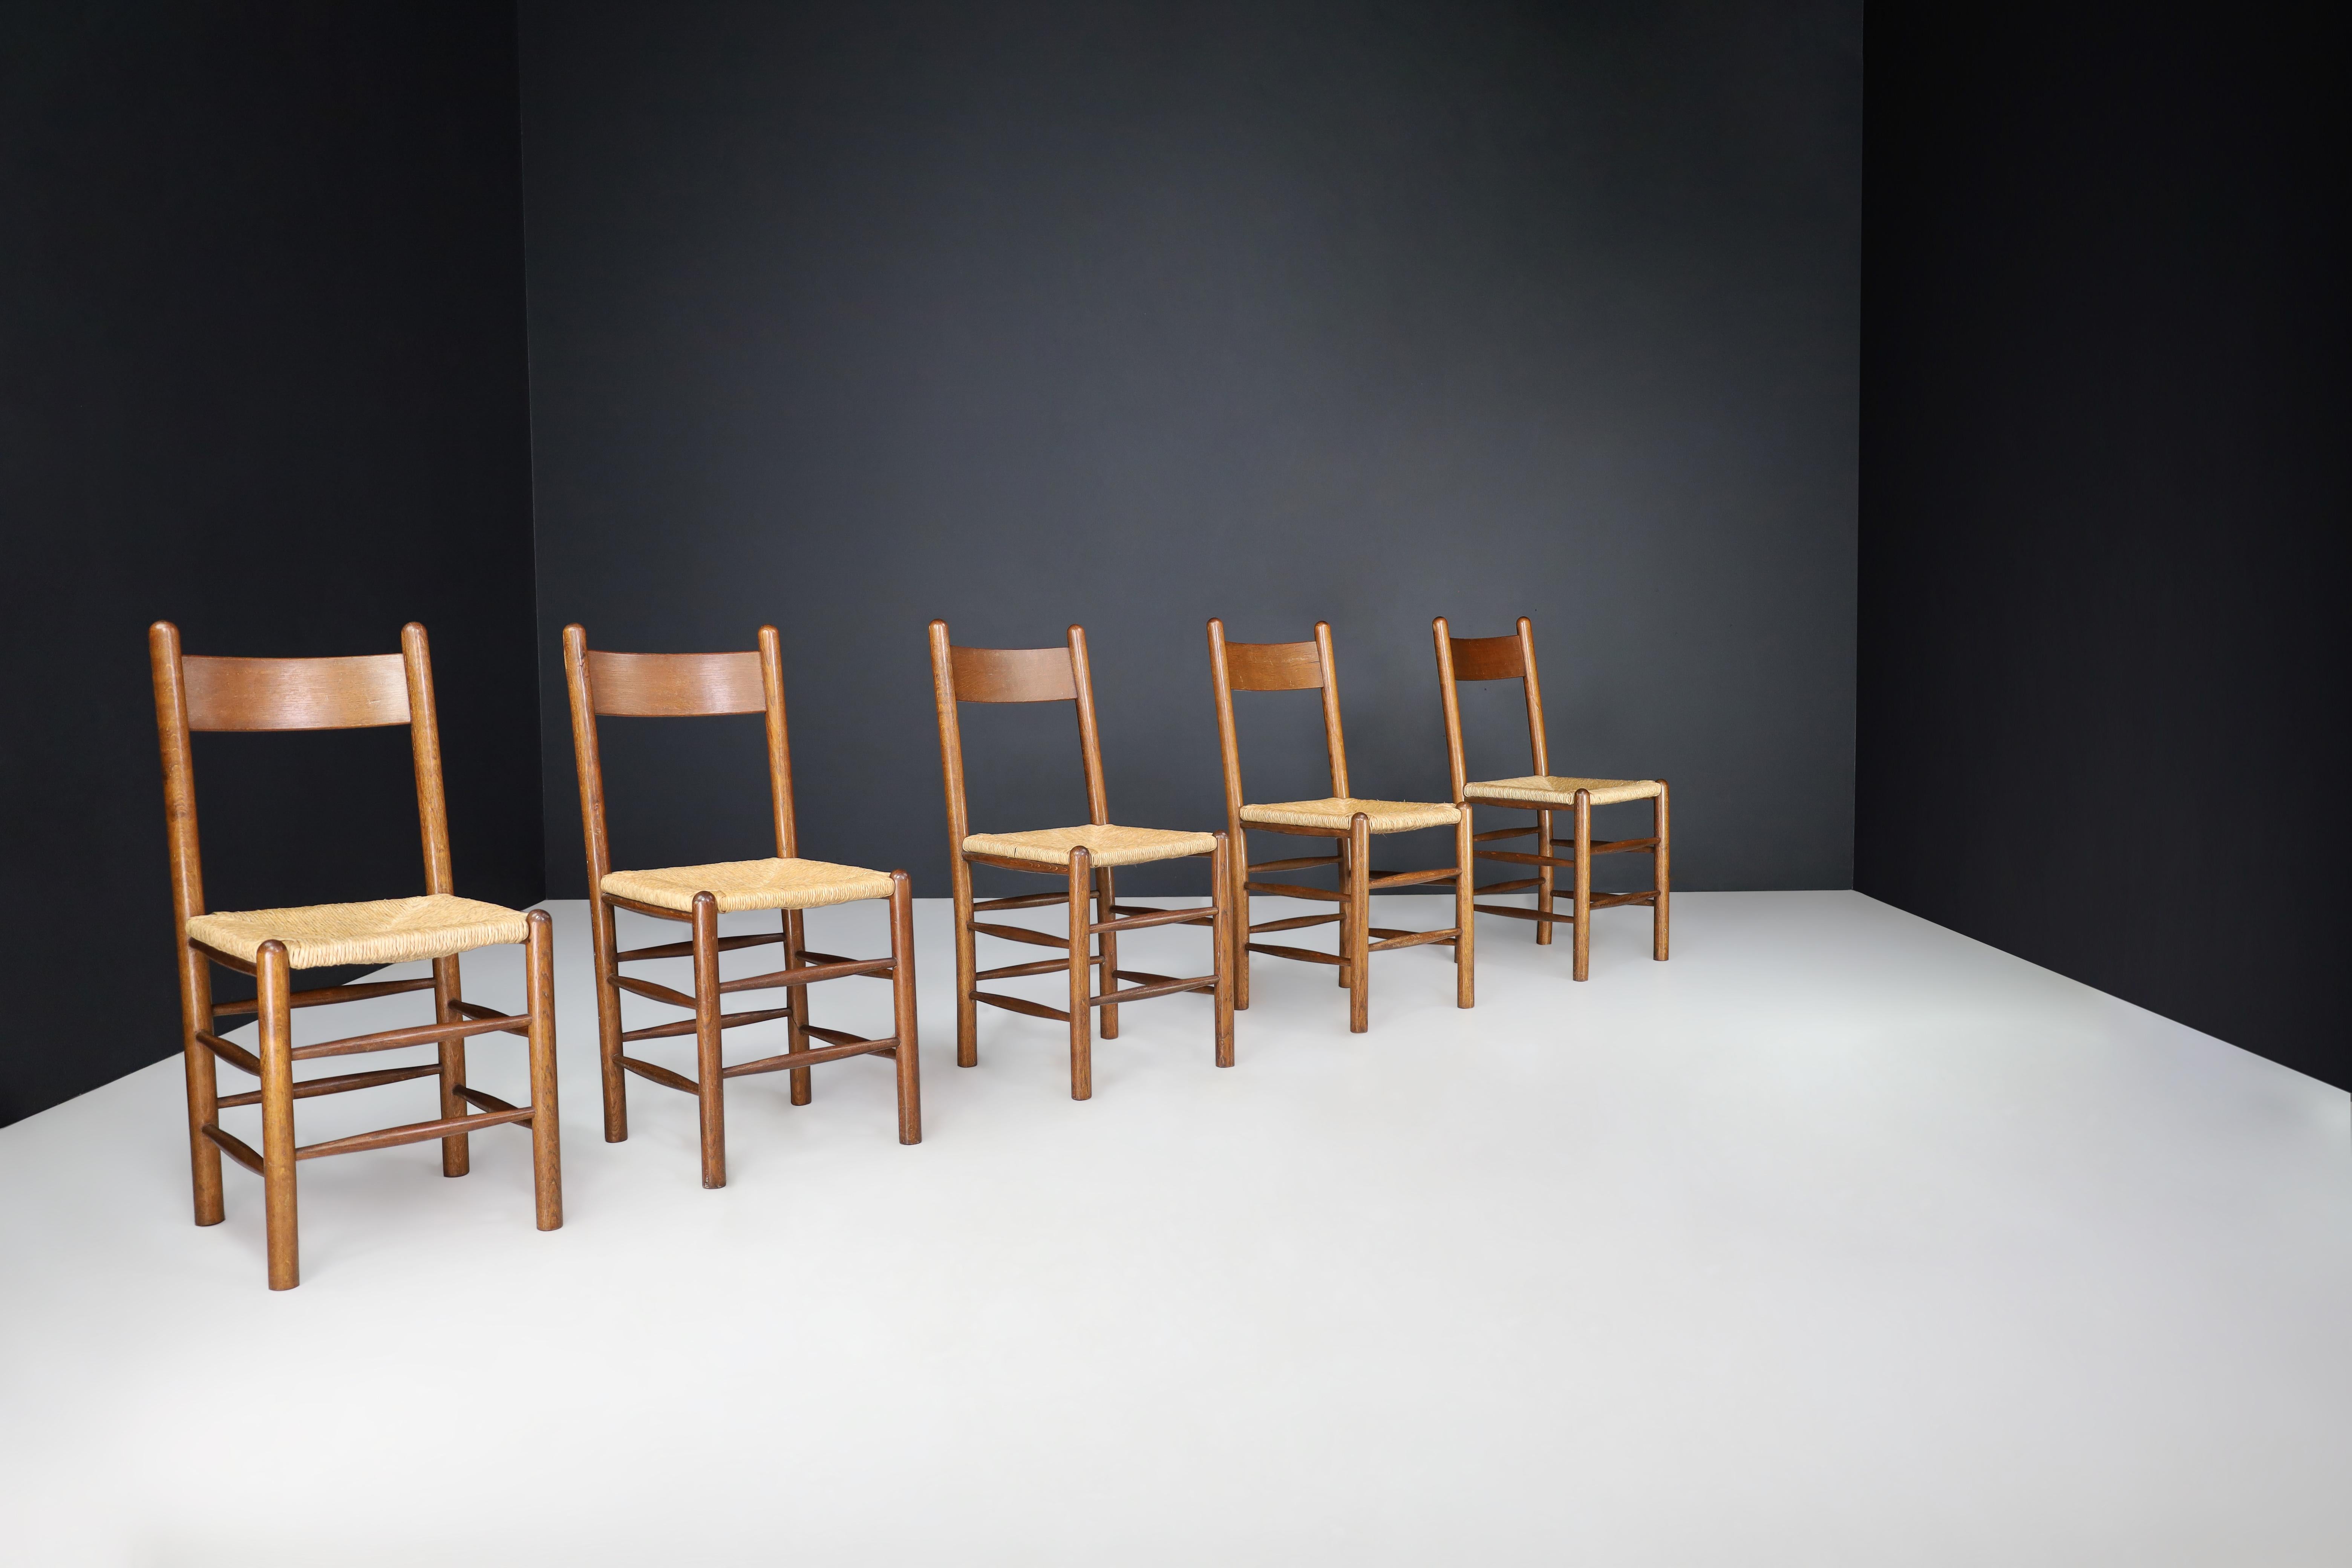 Charlotte Perriand Style Oak and Rush Dining Room Chairs, France, 1960s For Sale 4